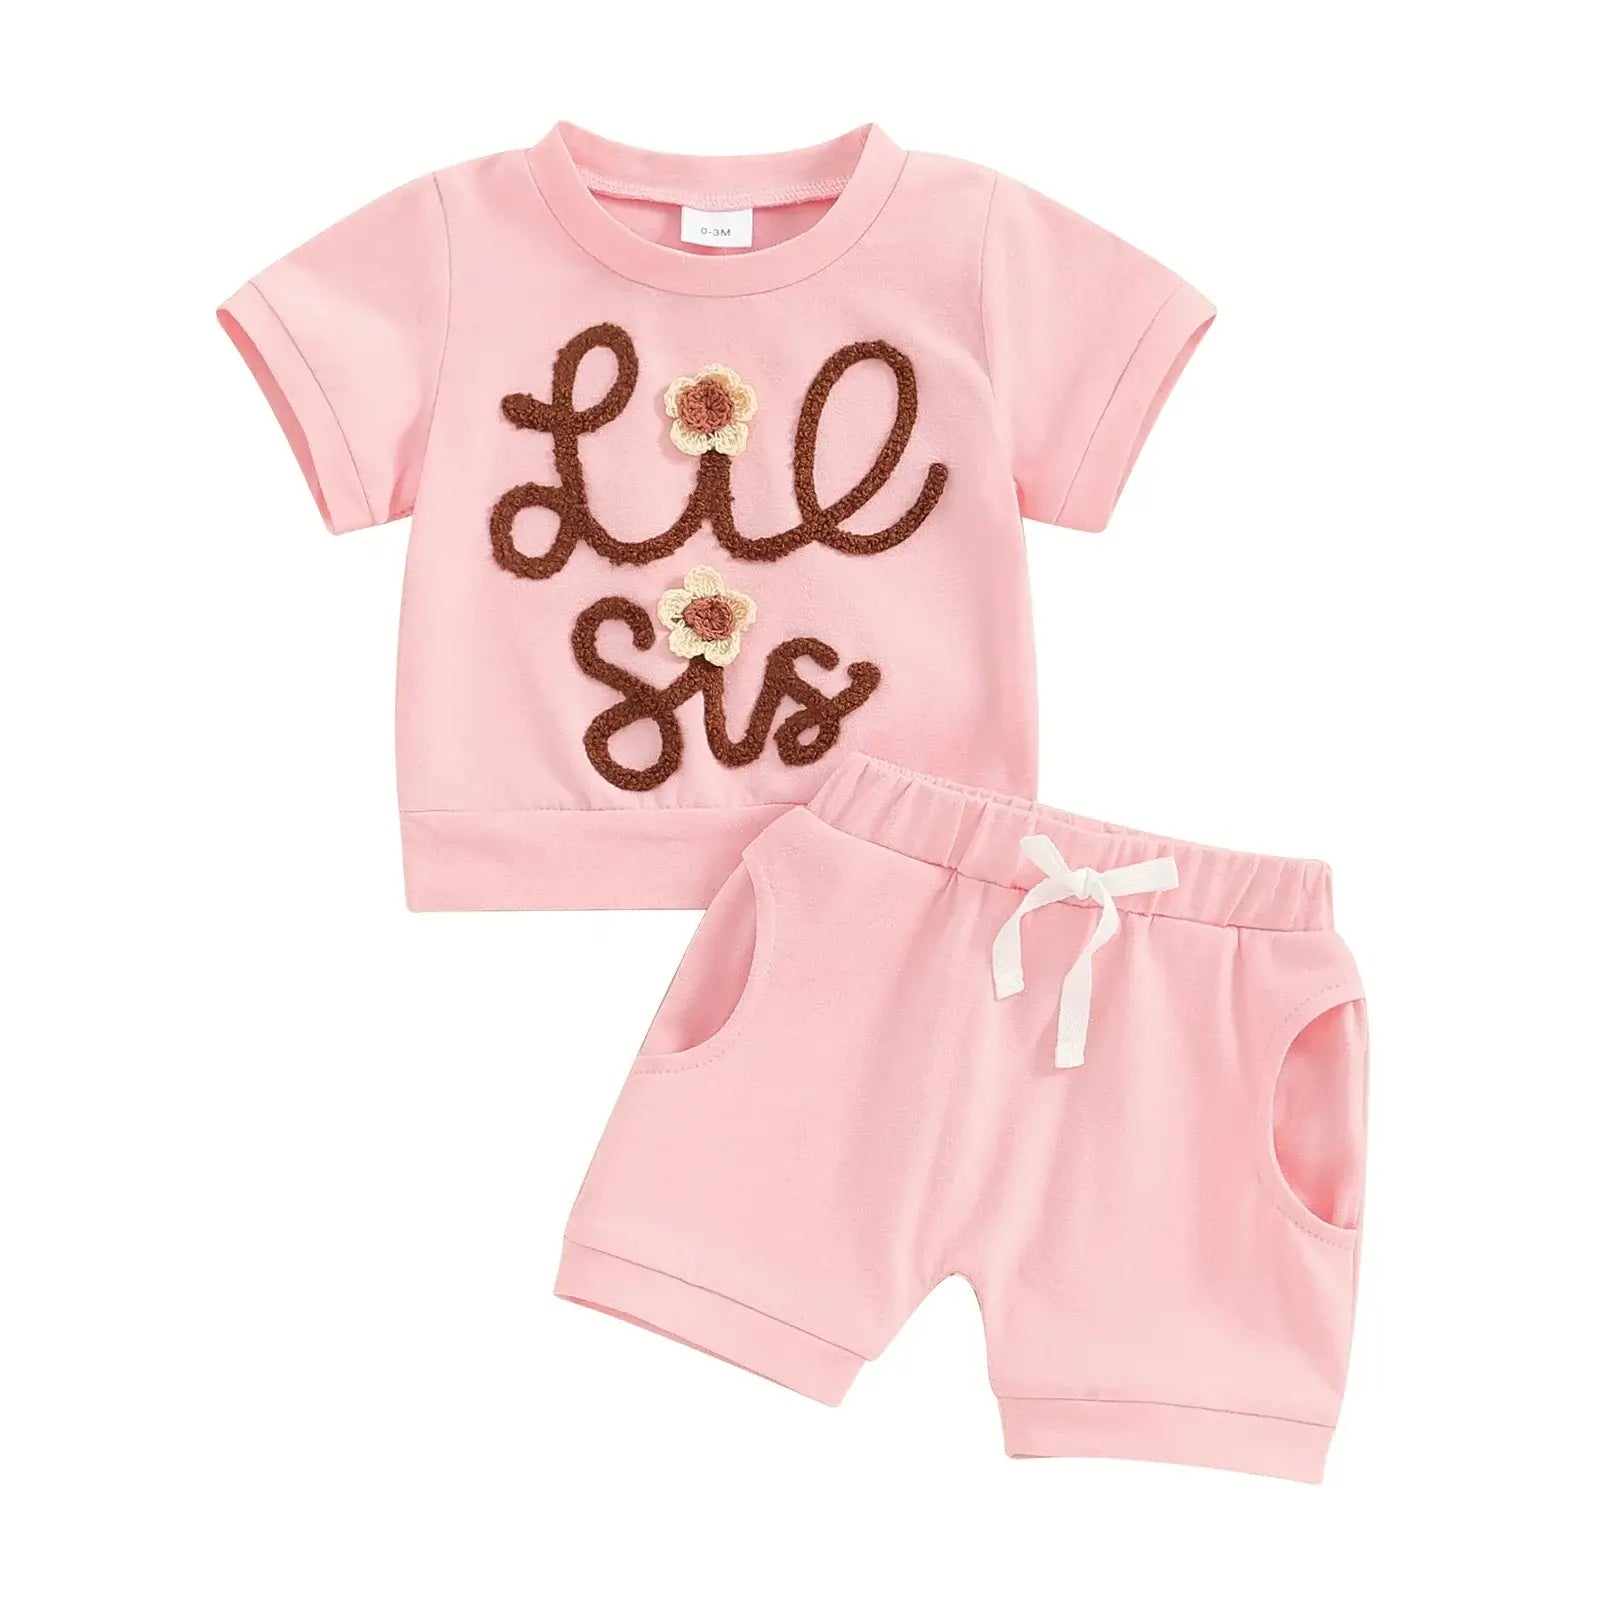 Lil Sis Pink Shorts Set | Little Sister Matching Outfit - Lulu Babe